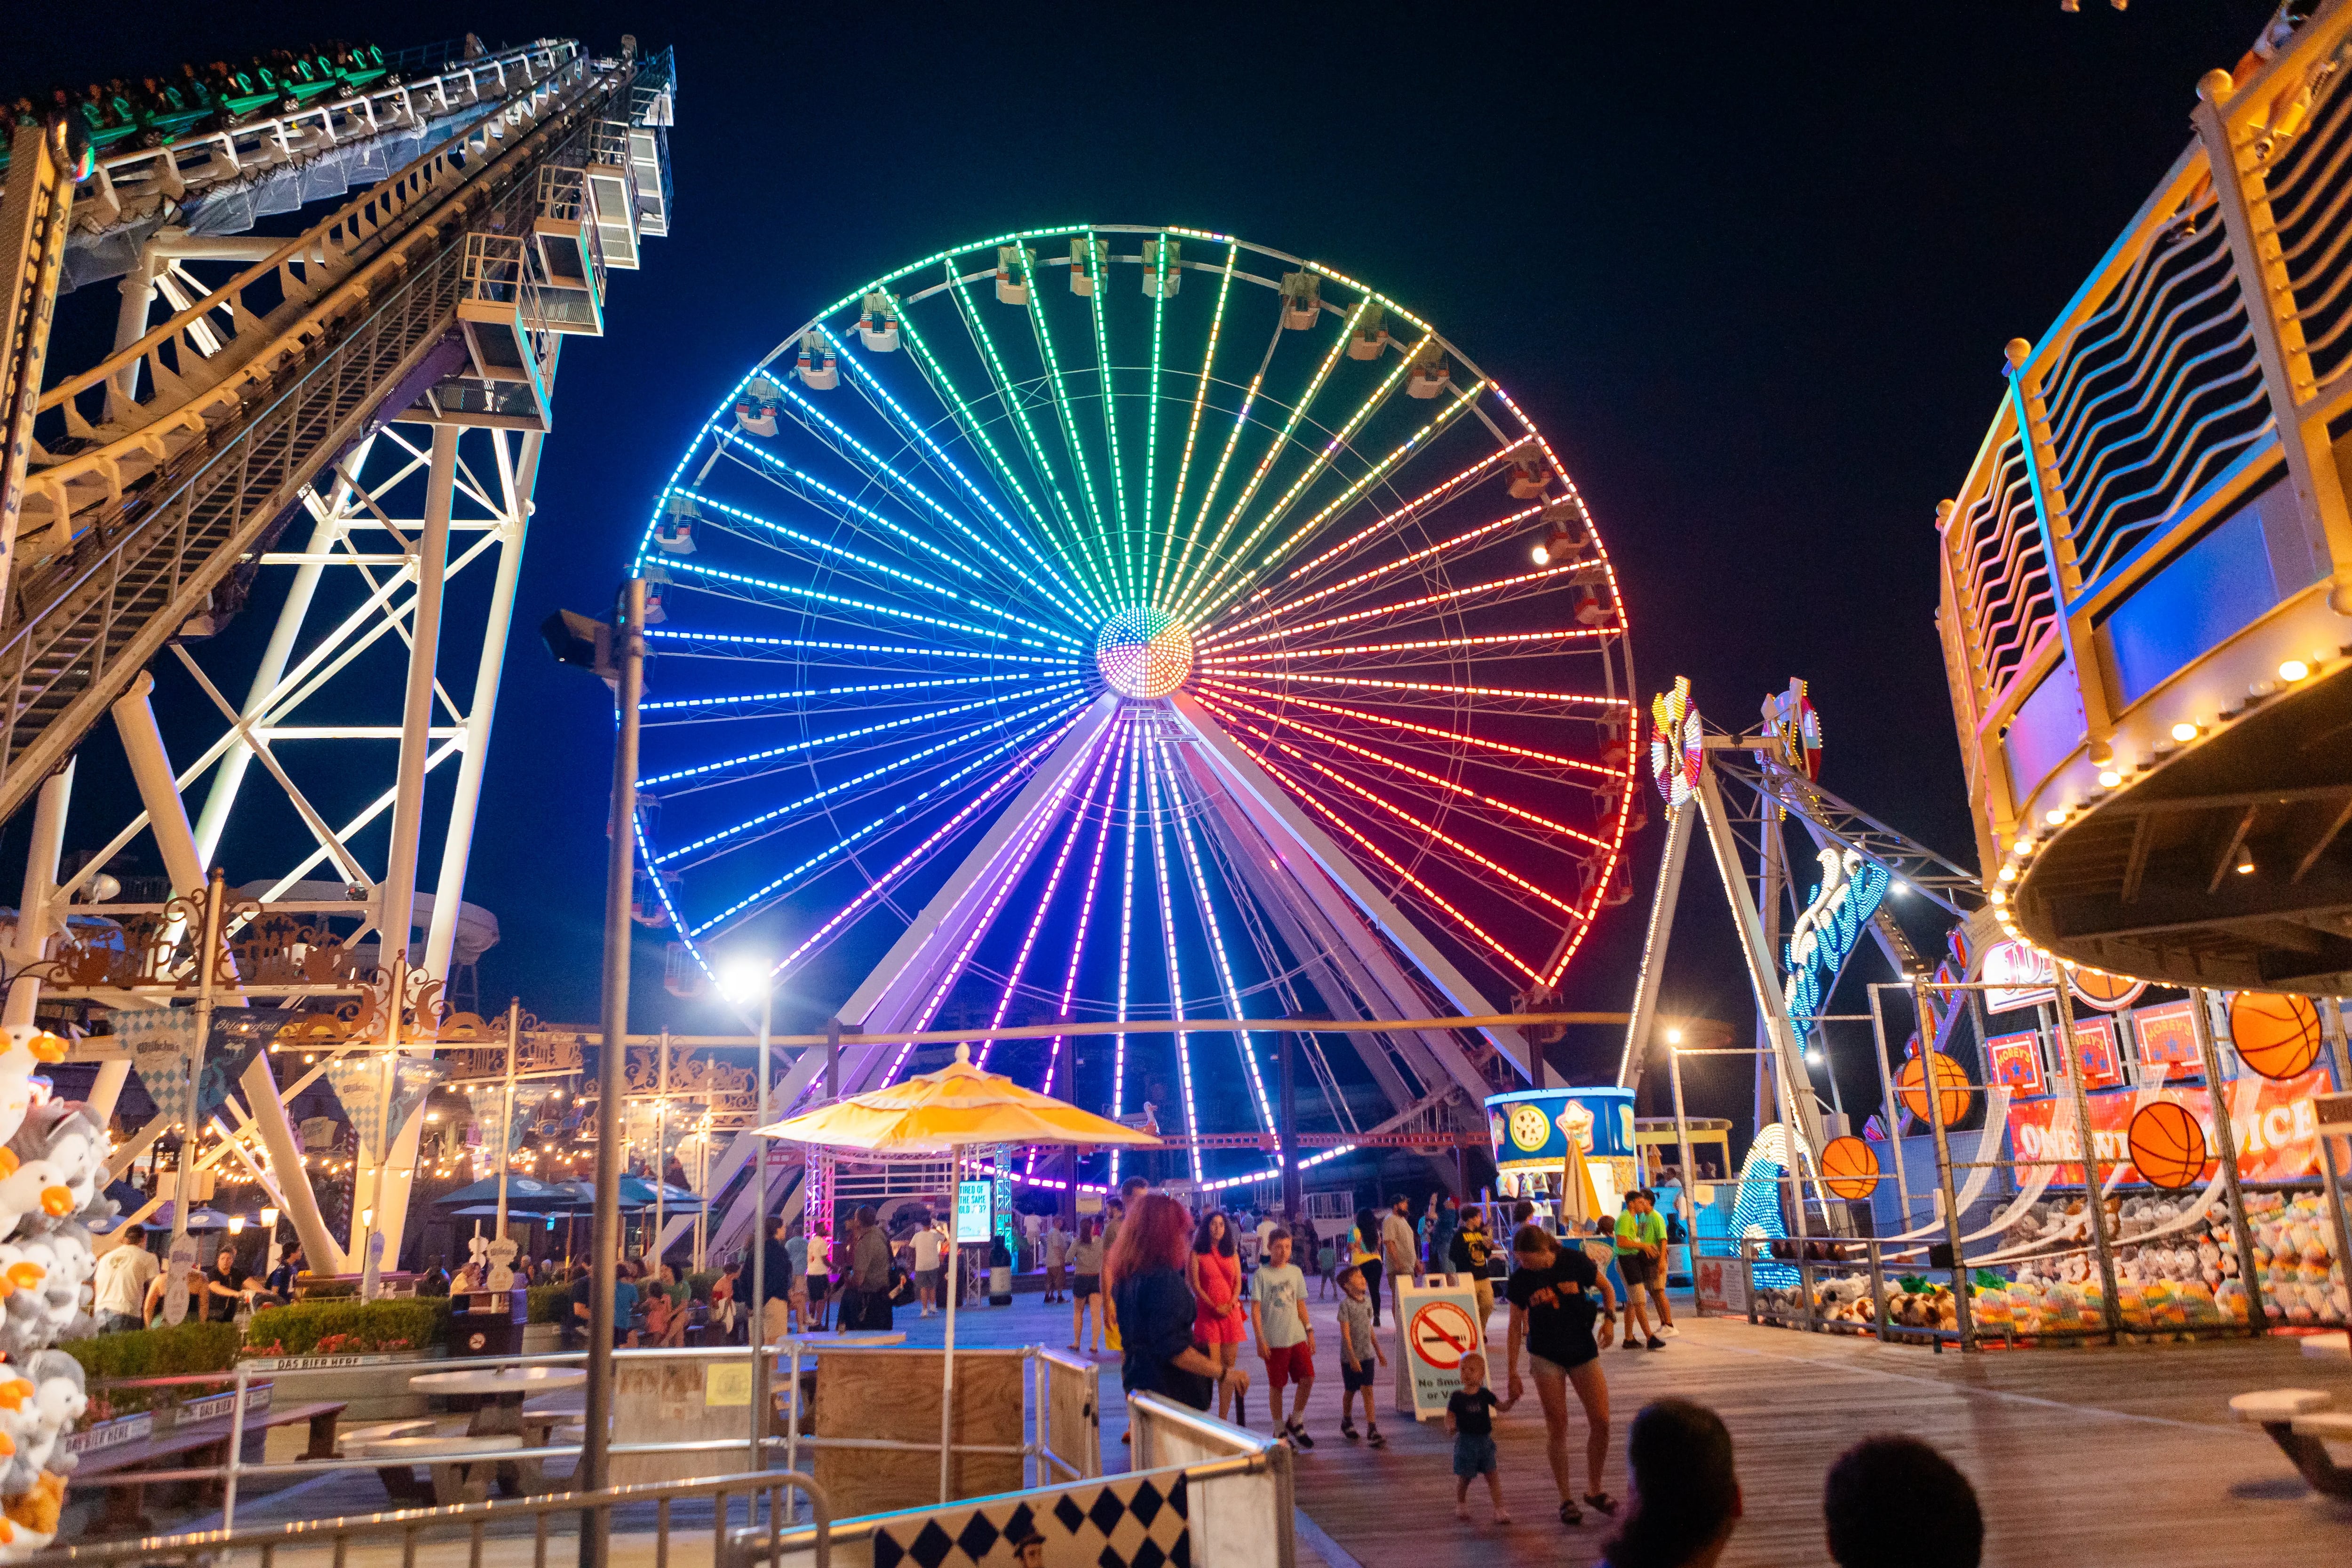 The Giant Wheel at Mariners Pier in Wildwood in June. Mariners Pier is one of three that make up Morey's Piers in Wildwood with amusement rides, games, and a water park.